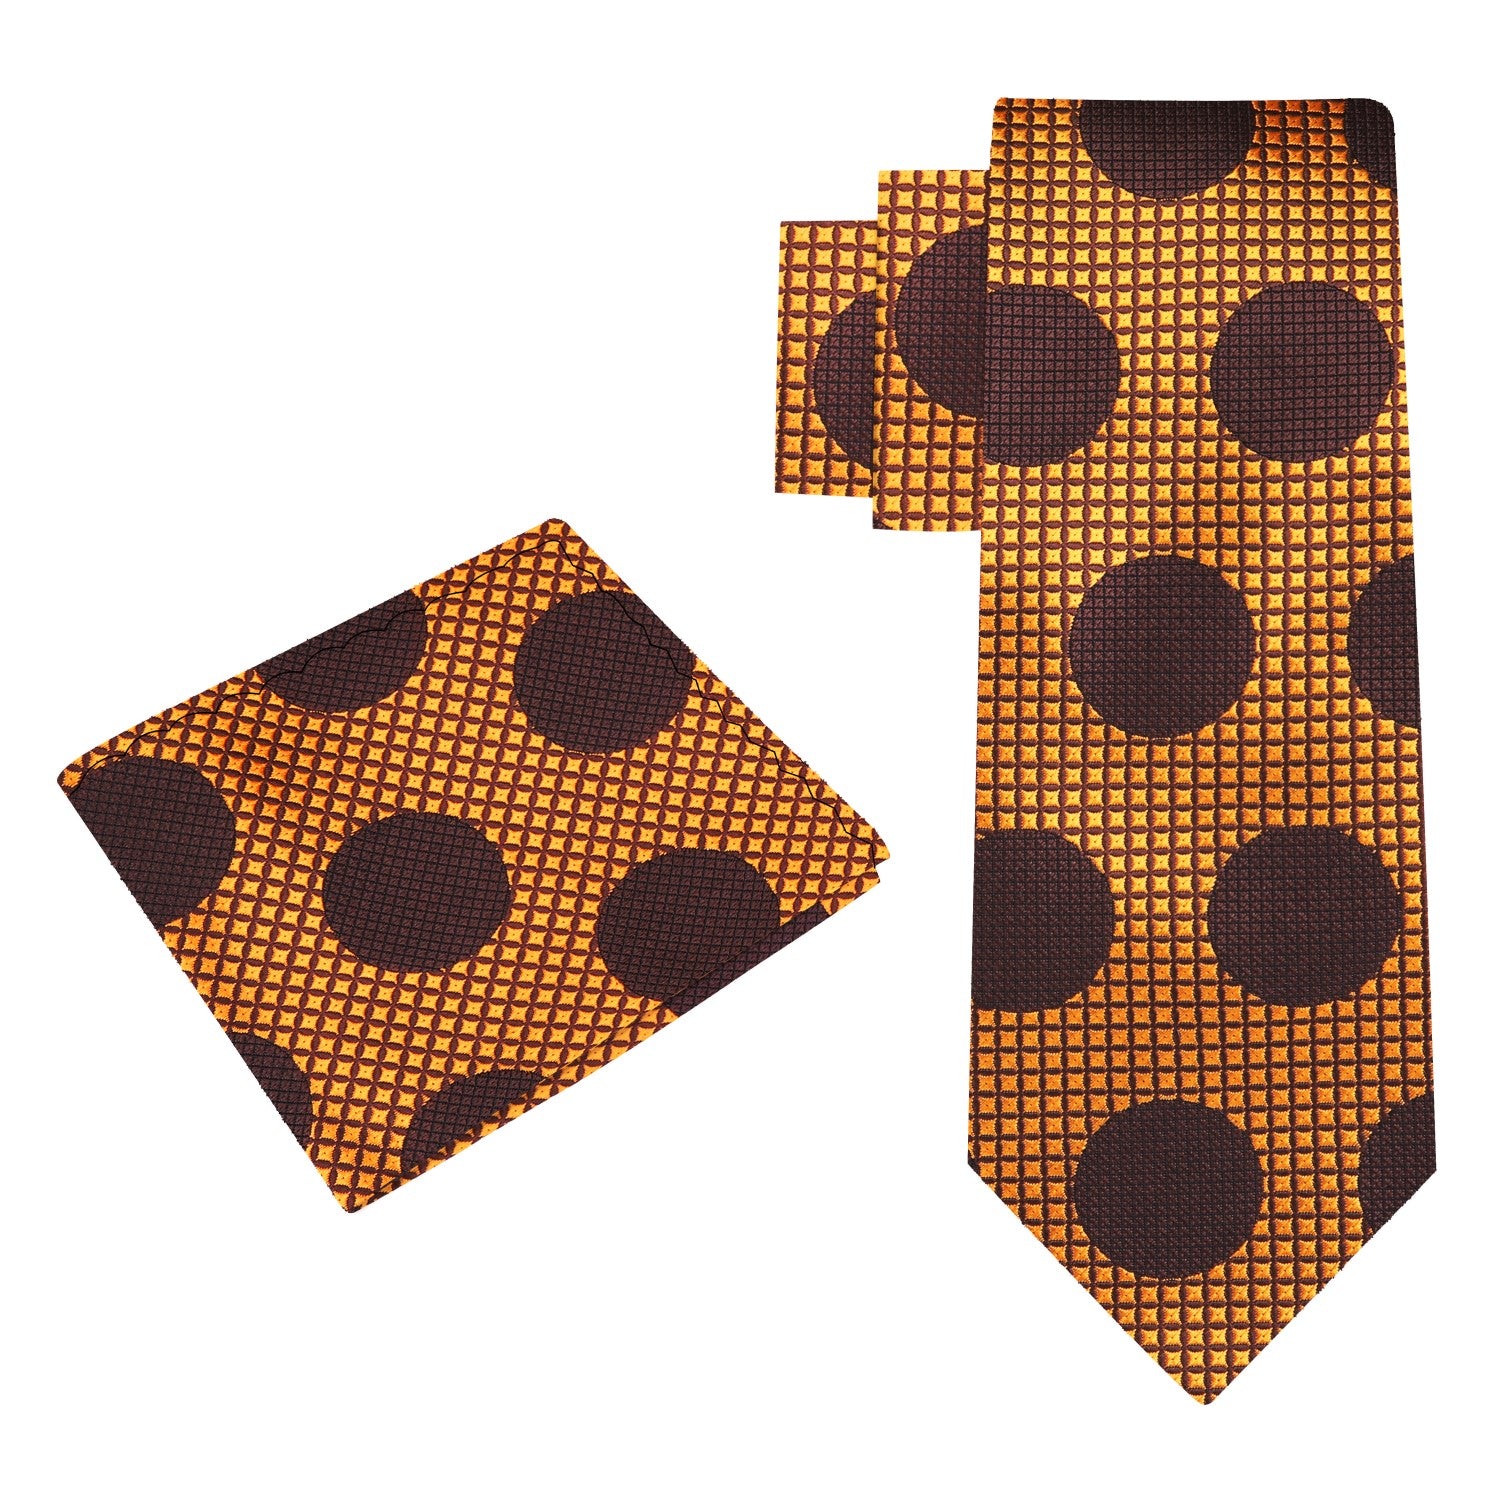 Alt View: A Copper, Brown Large Polka Dot Pattern Silk Necktie With Matching Pocket Square